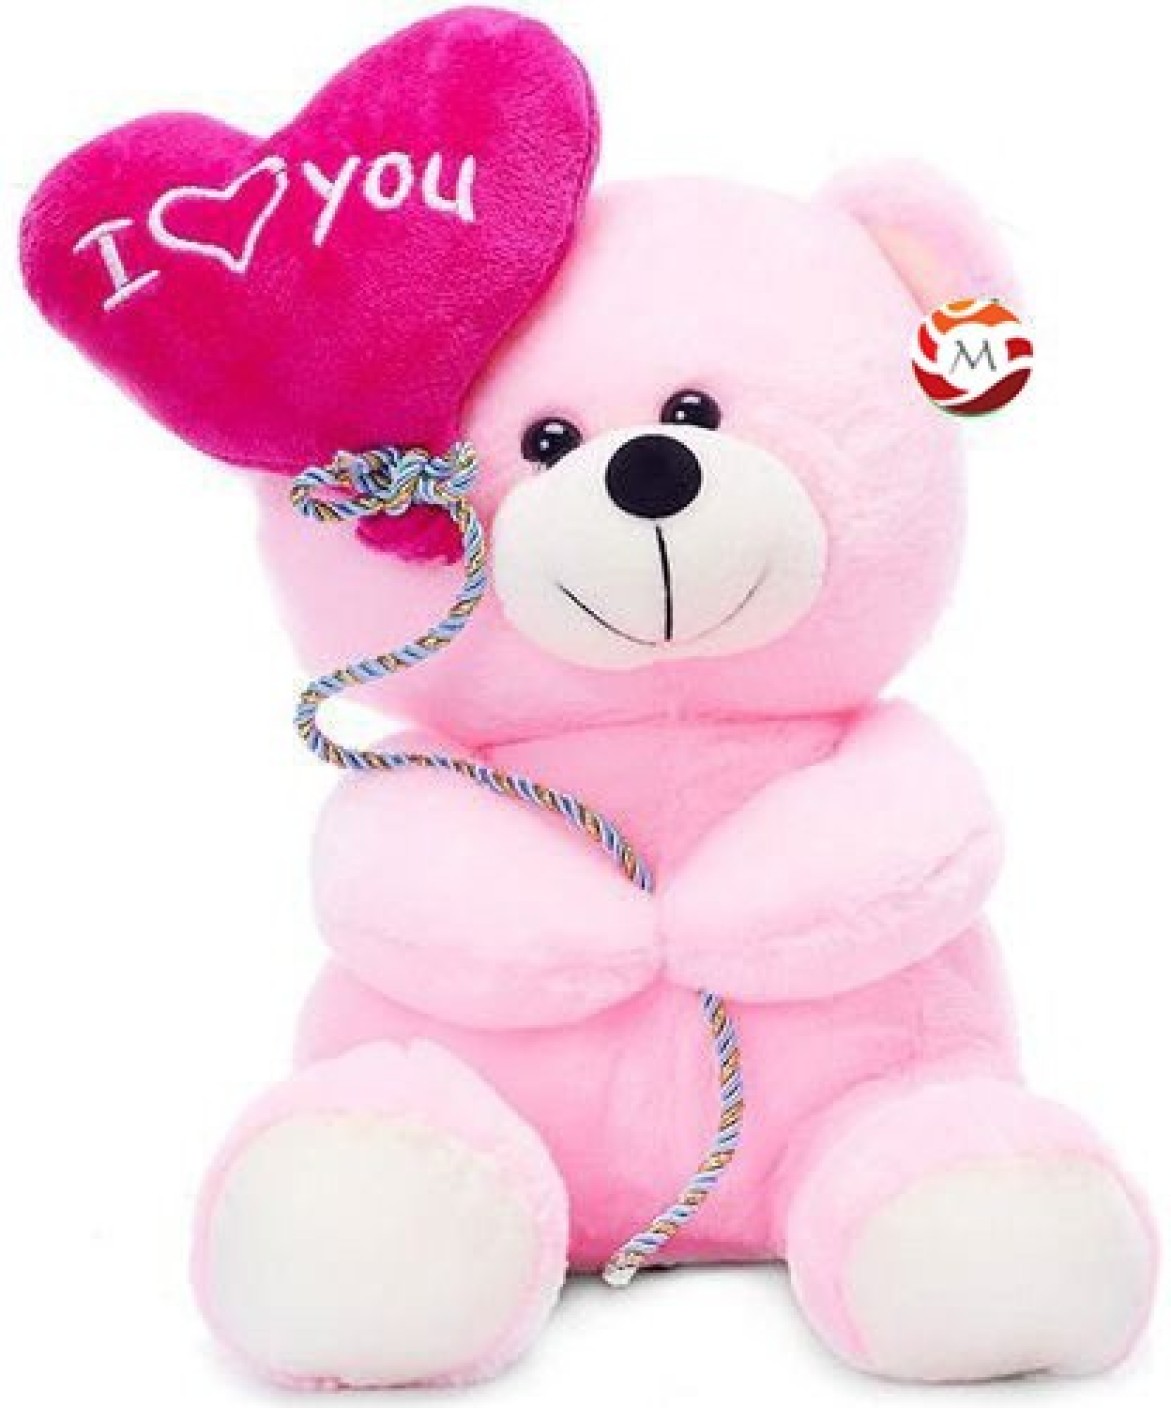 teddy wallpapers love you,stuffed toy,teddy bear,toy,pink,plush